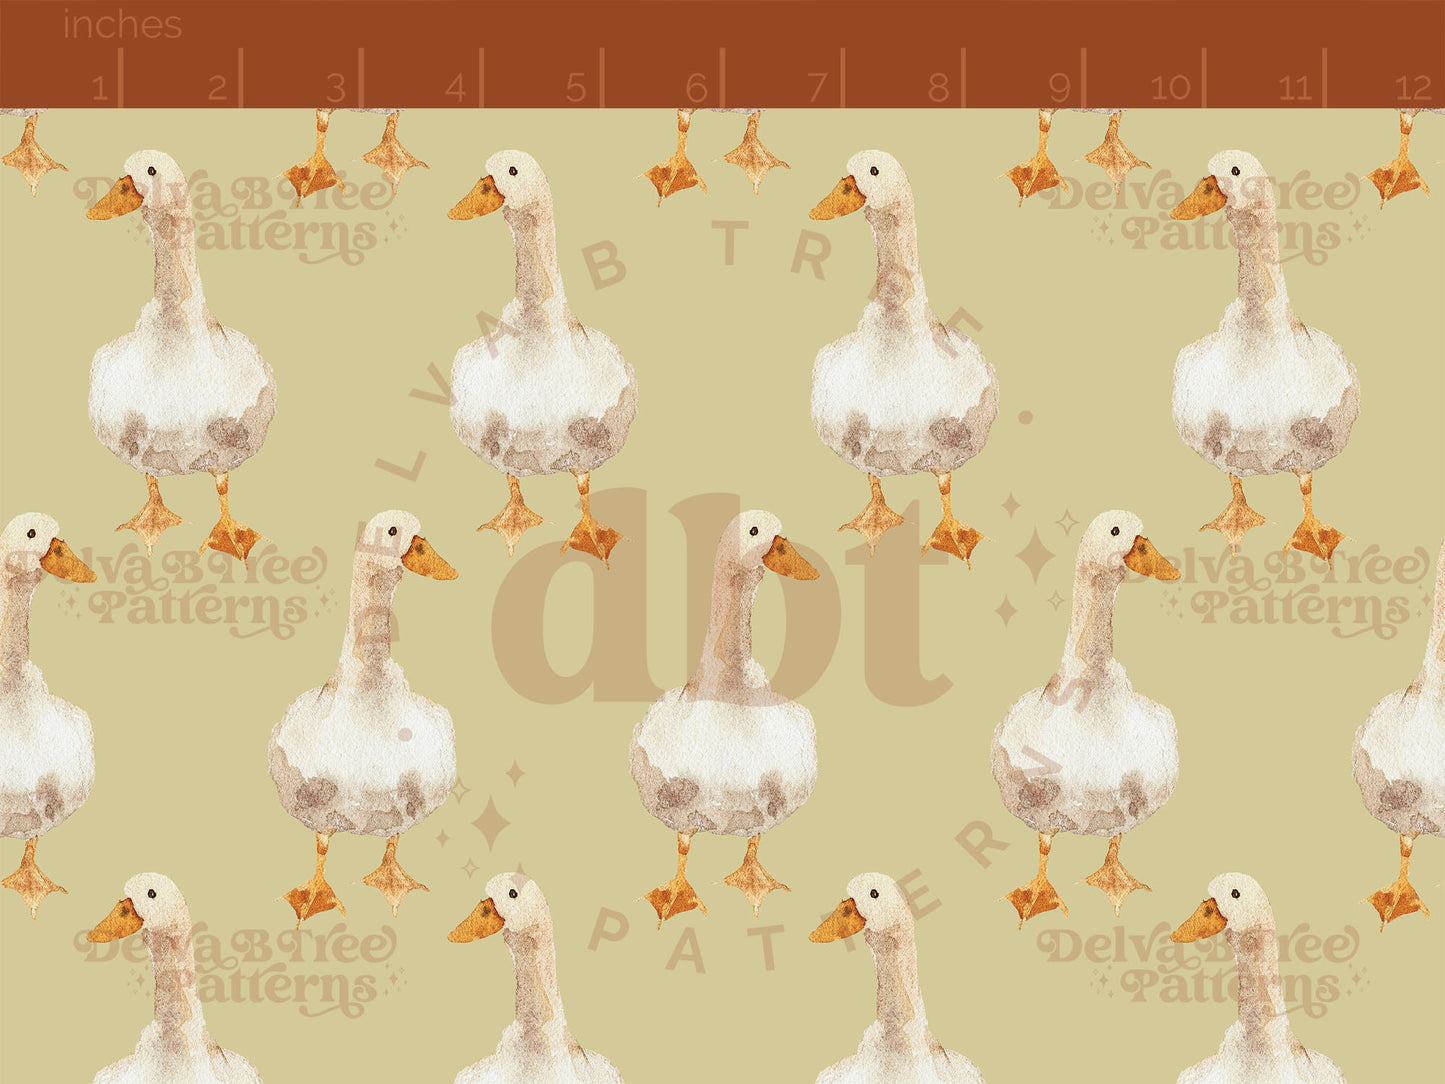 Watercolor goose on a dusty yellow pattern scale for small shops that make handmade products in small batches with spring farm animal digital files.